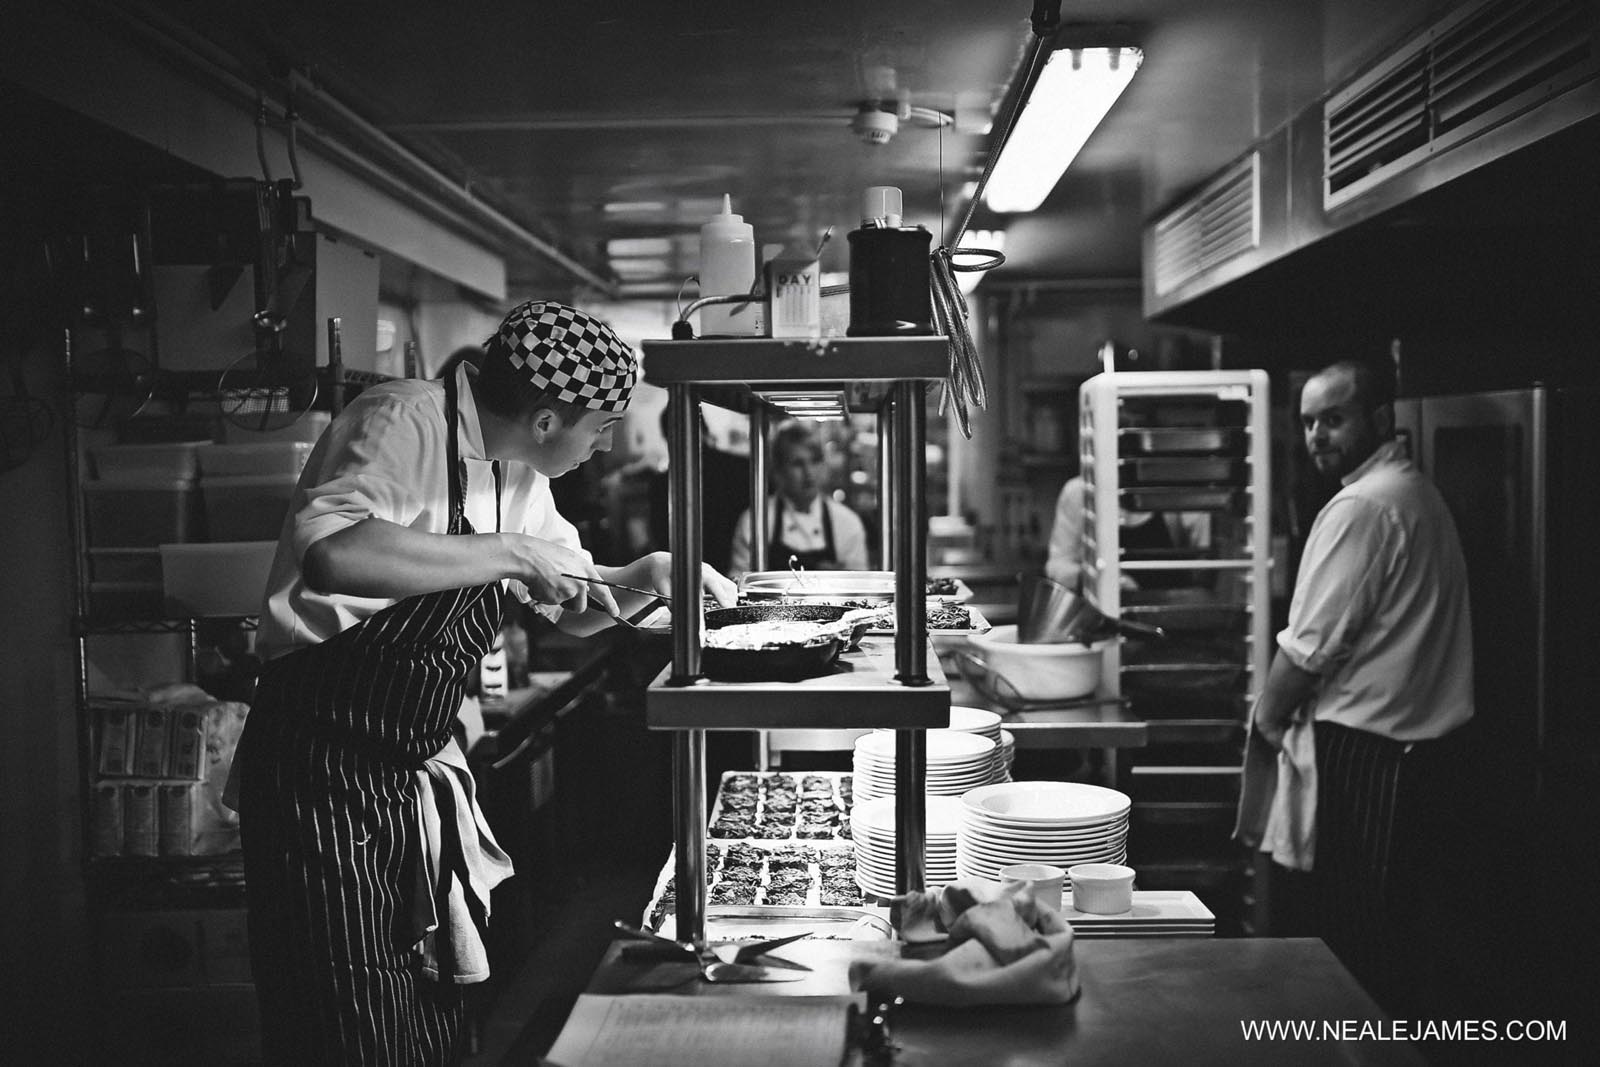 Chefs plating up food for an event at Farnham Castle